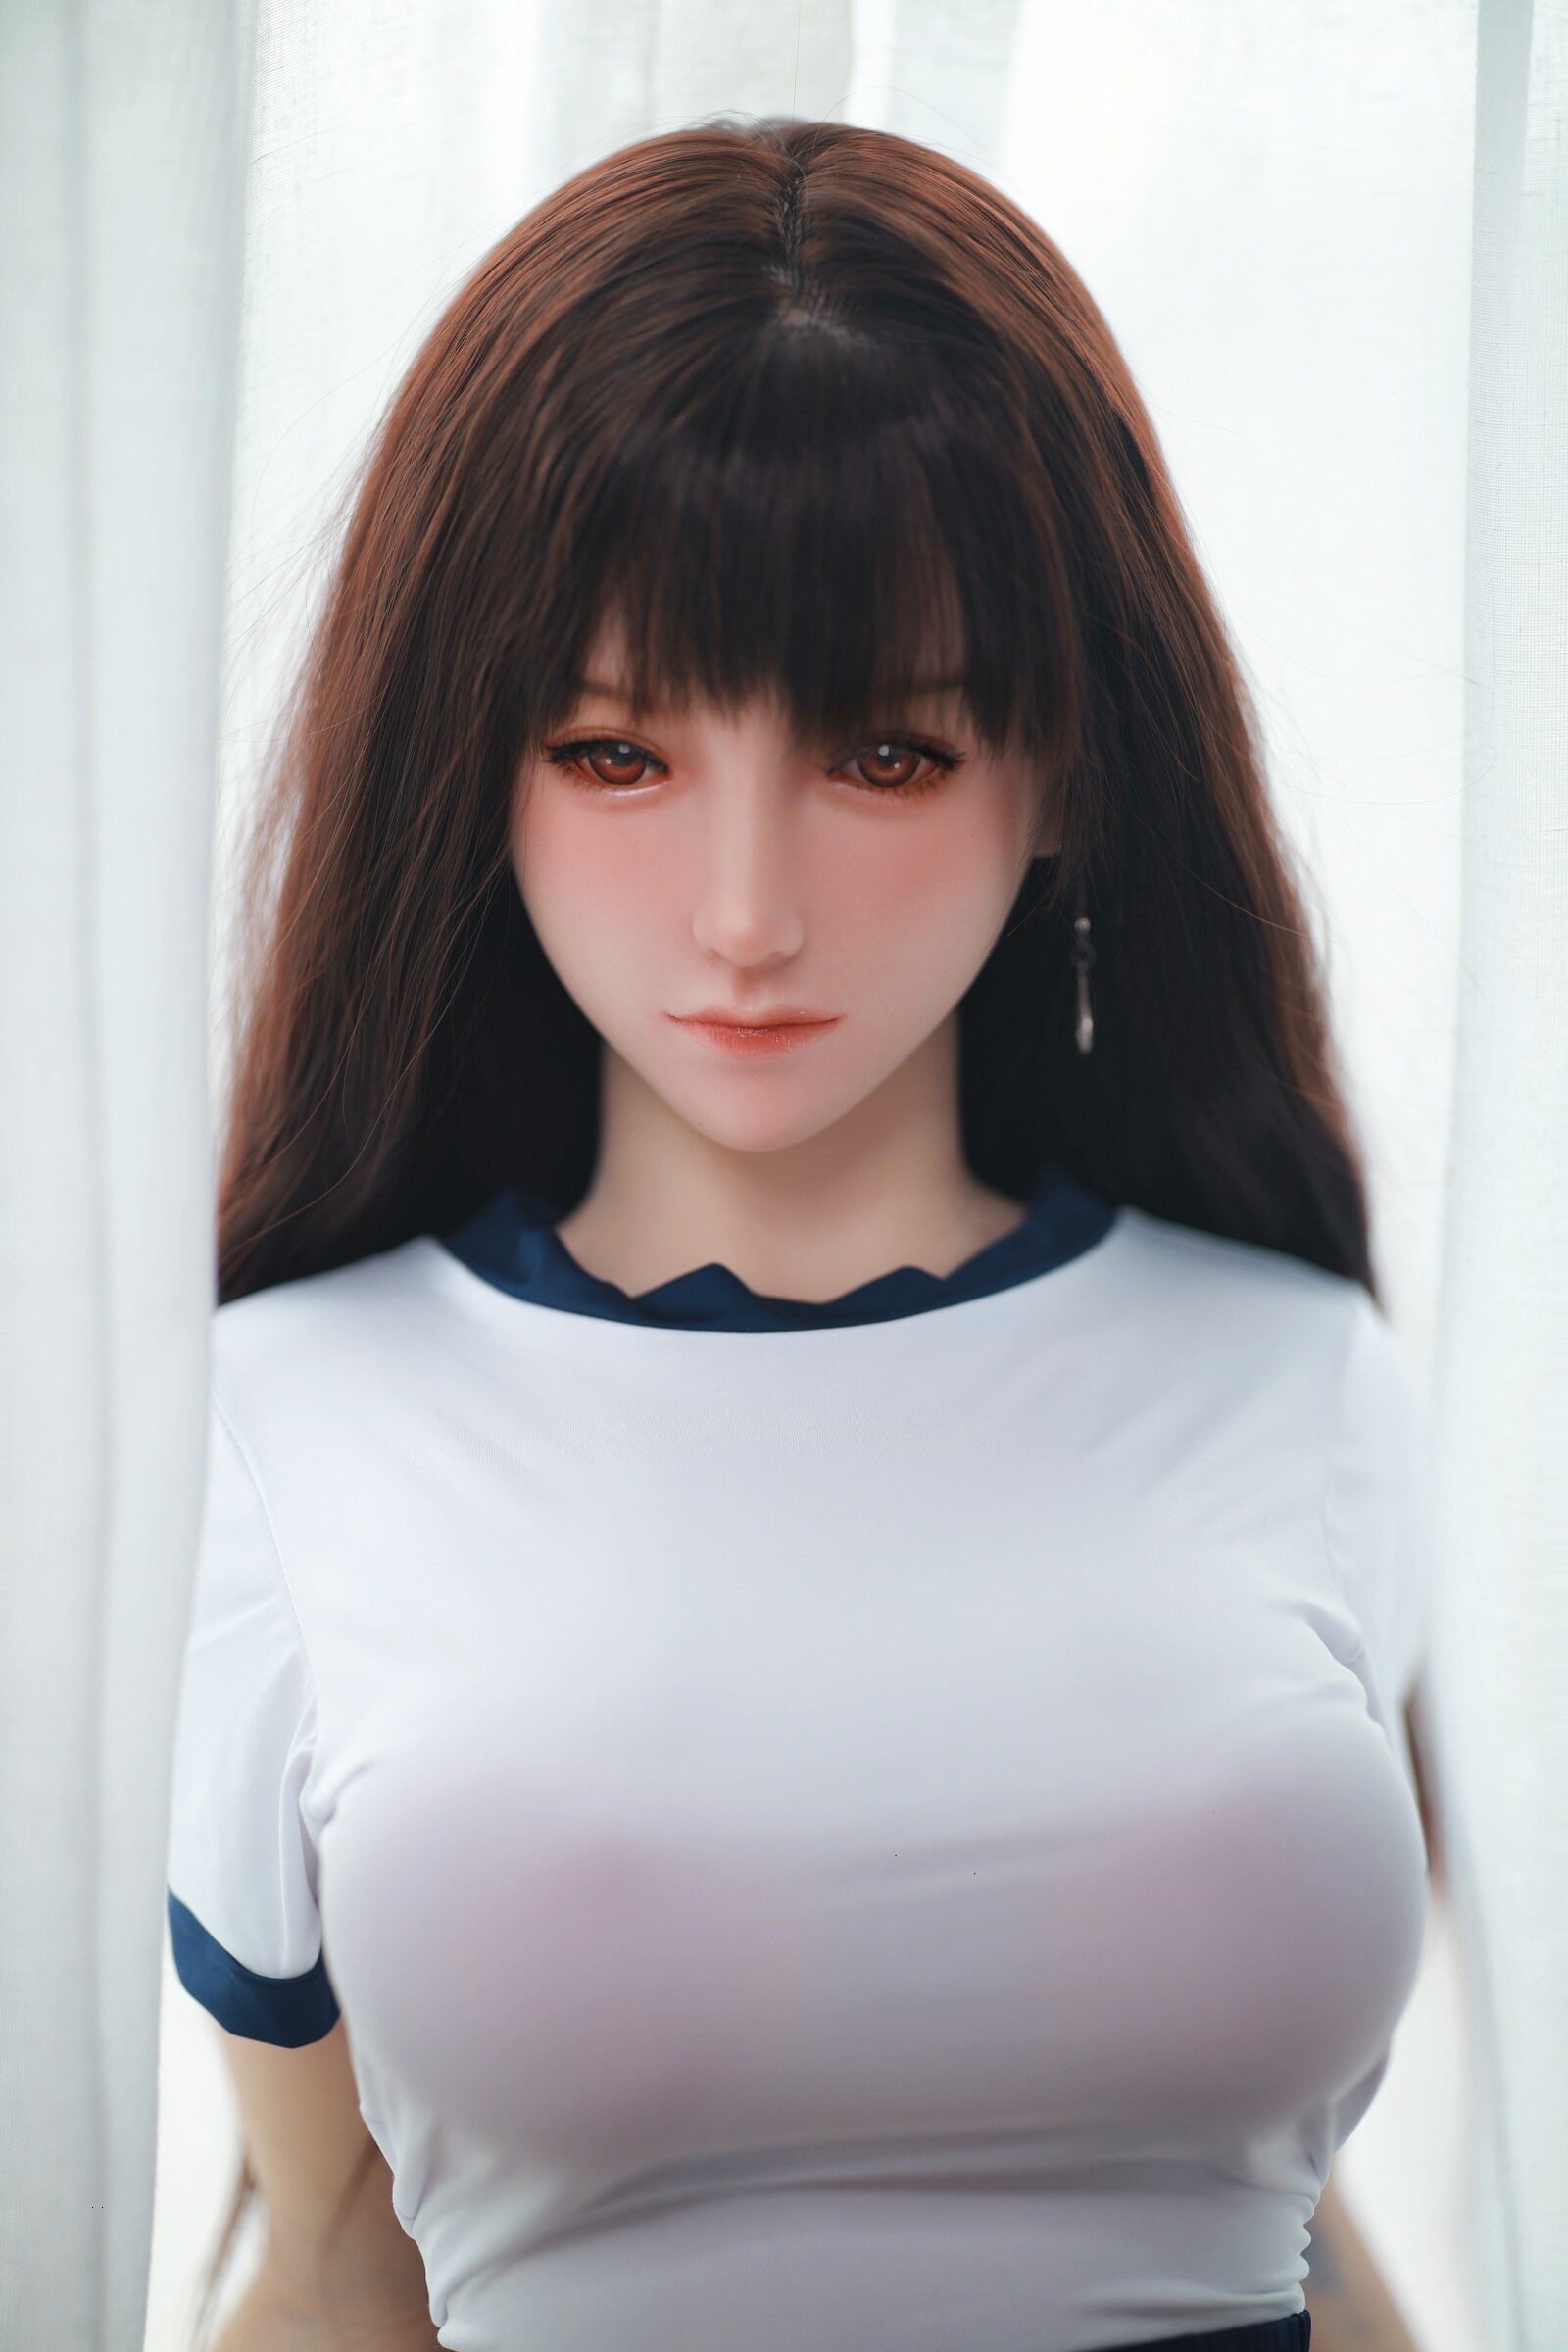 Red Angle Realistic Full Platinum Silicone Implanted Hair Pussy Vagina Japanese Real Love Dolls for Men Masturbator Love Dolls,Masturbator,Love Dolls,Adult sex dolls,Adult Dolls,Adult Love Dolls